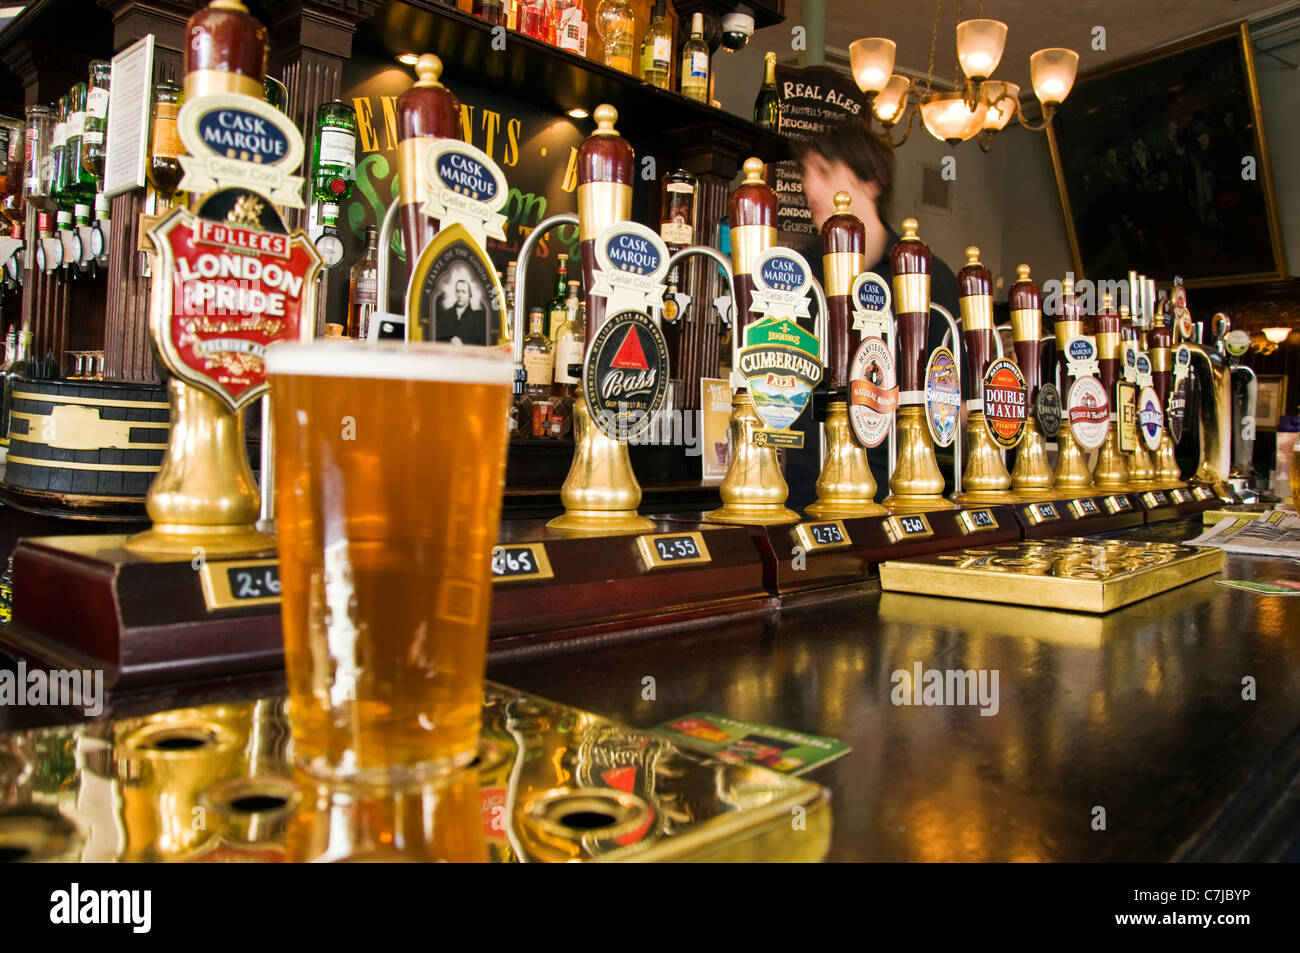 Real Ale hand pumps in a bar pub Stock Photo